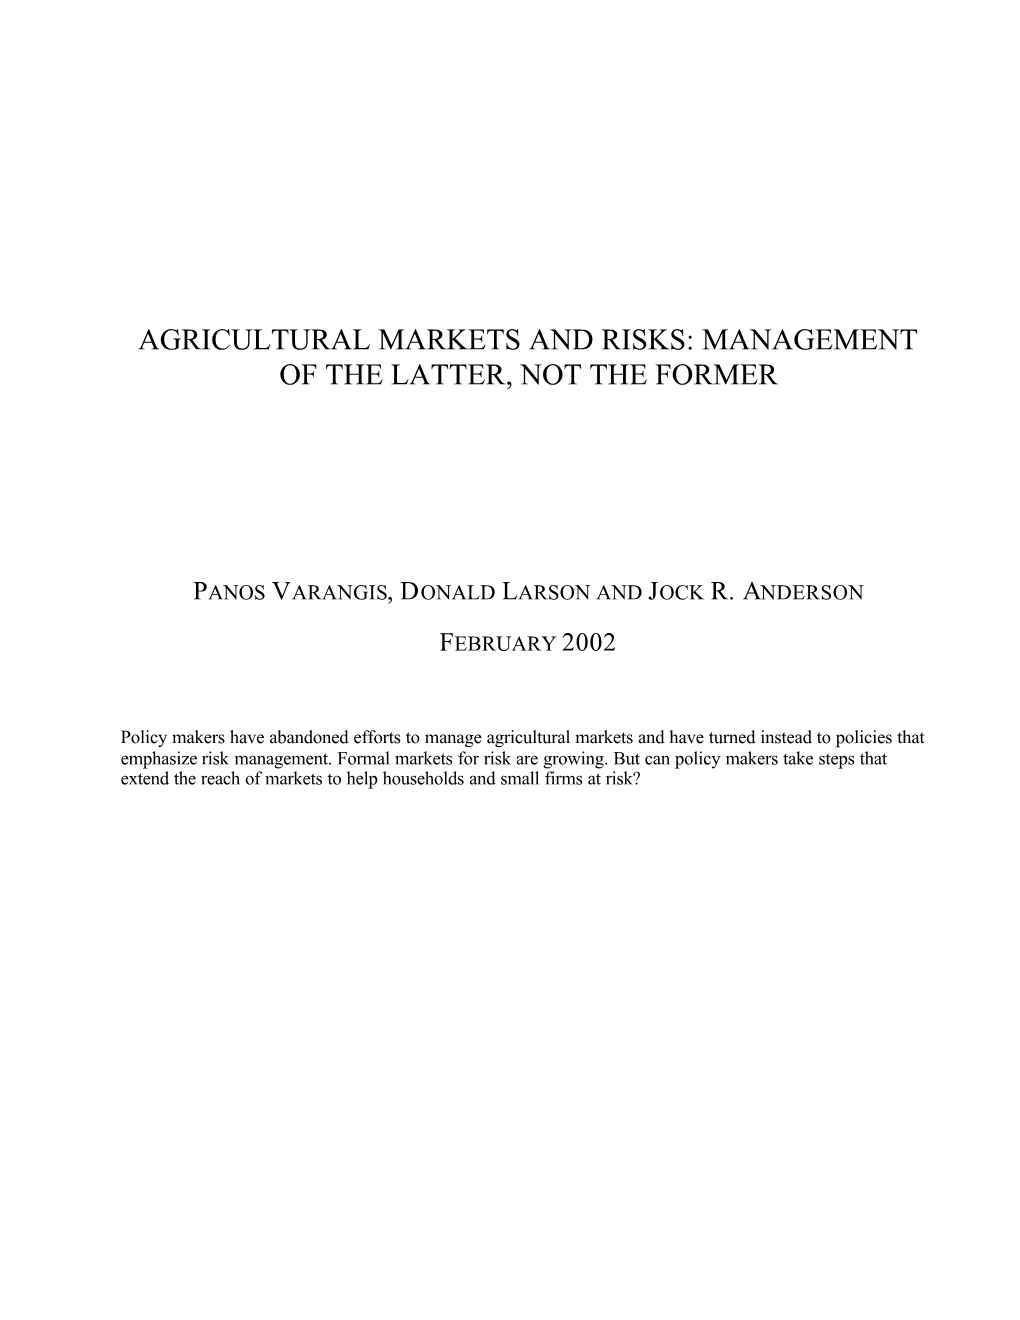 Agricultural Markets and Risks: Management of the Latter, Not the Former